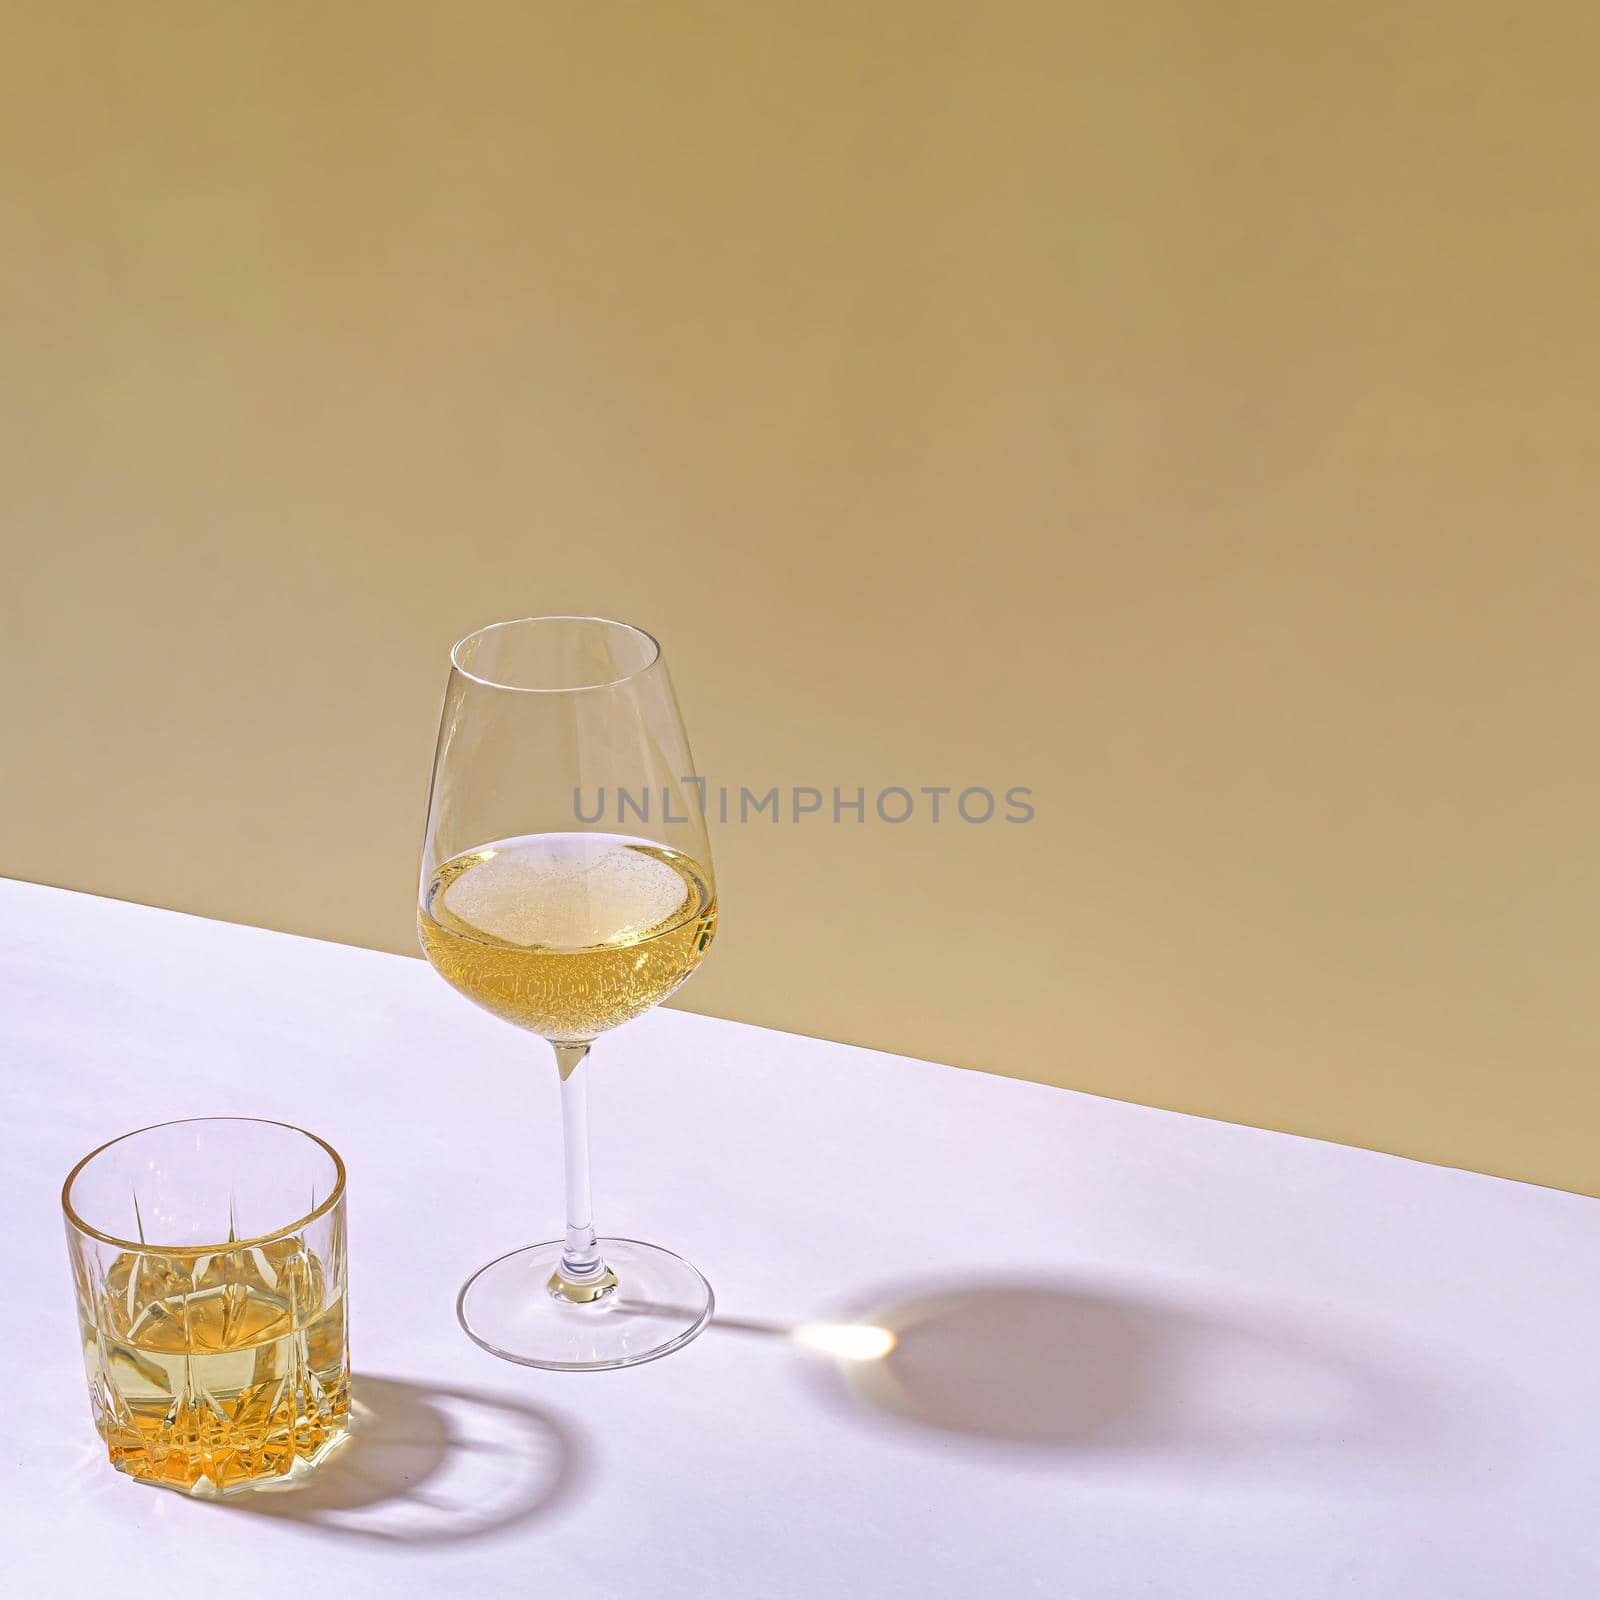 Tumbler of whiskey and glass of white wine by sergii_gnatiuk